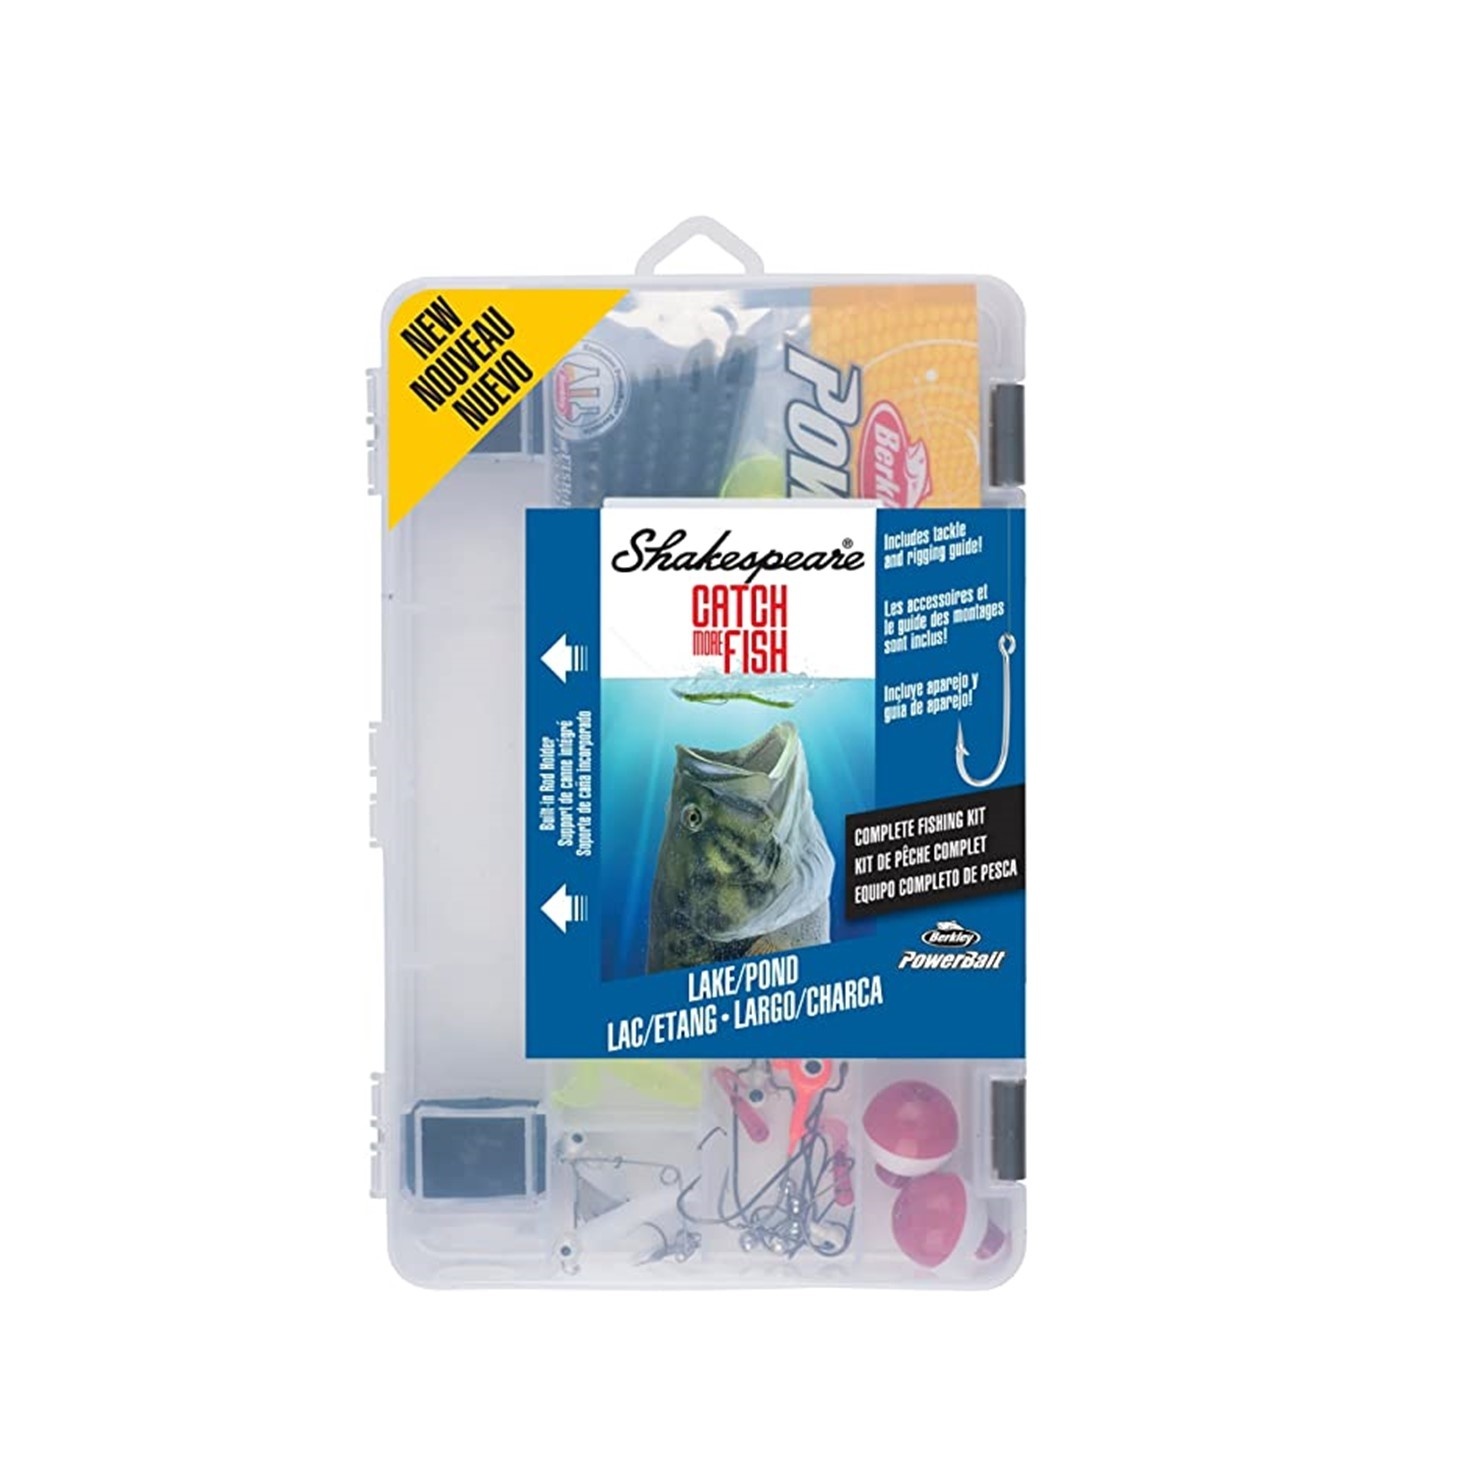 Shakespeare Catch More Fish Lake/Pond Tackle Box Kit